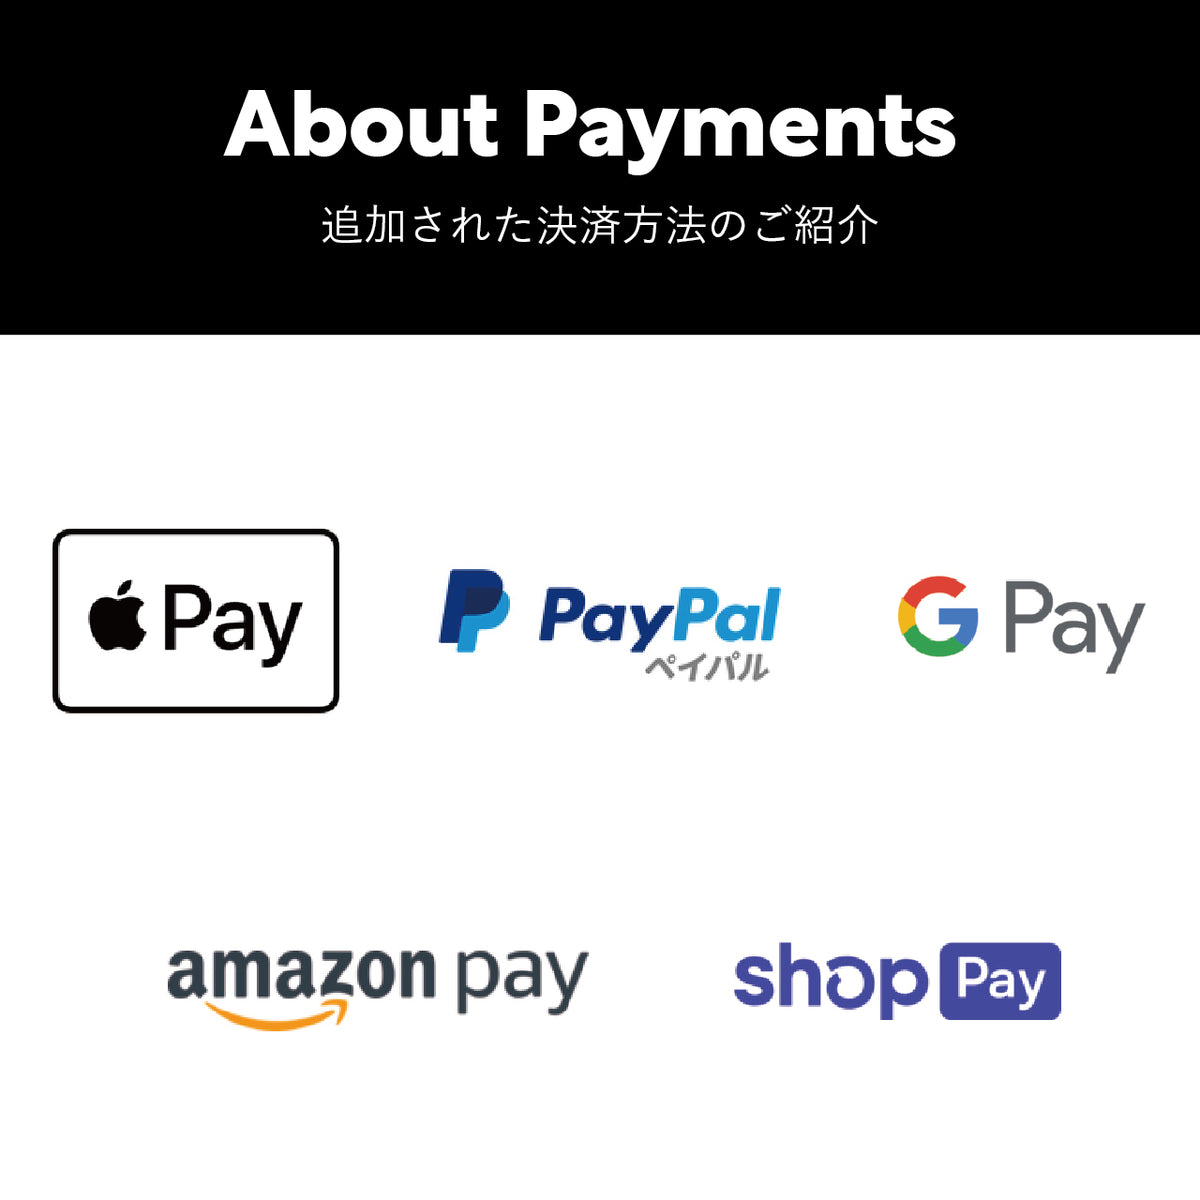 Newly added payment methods